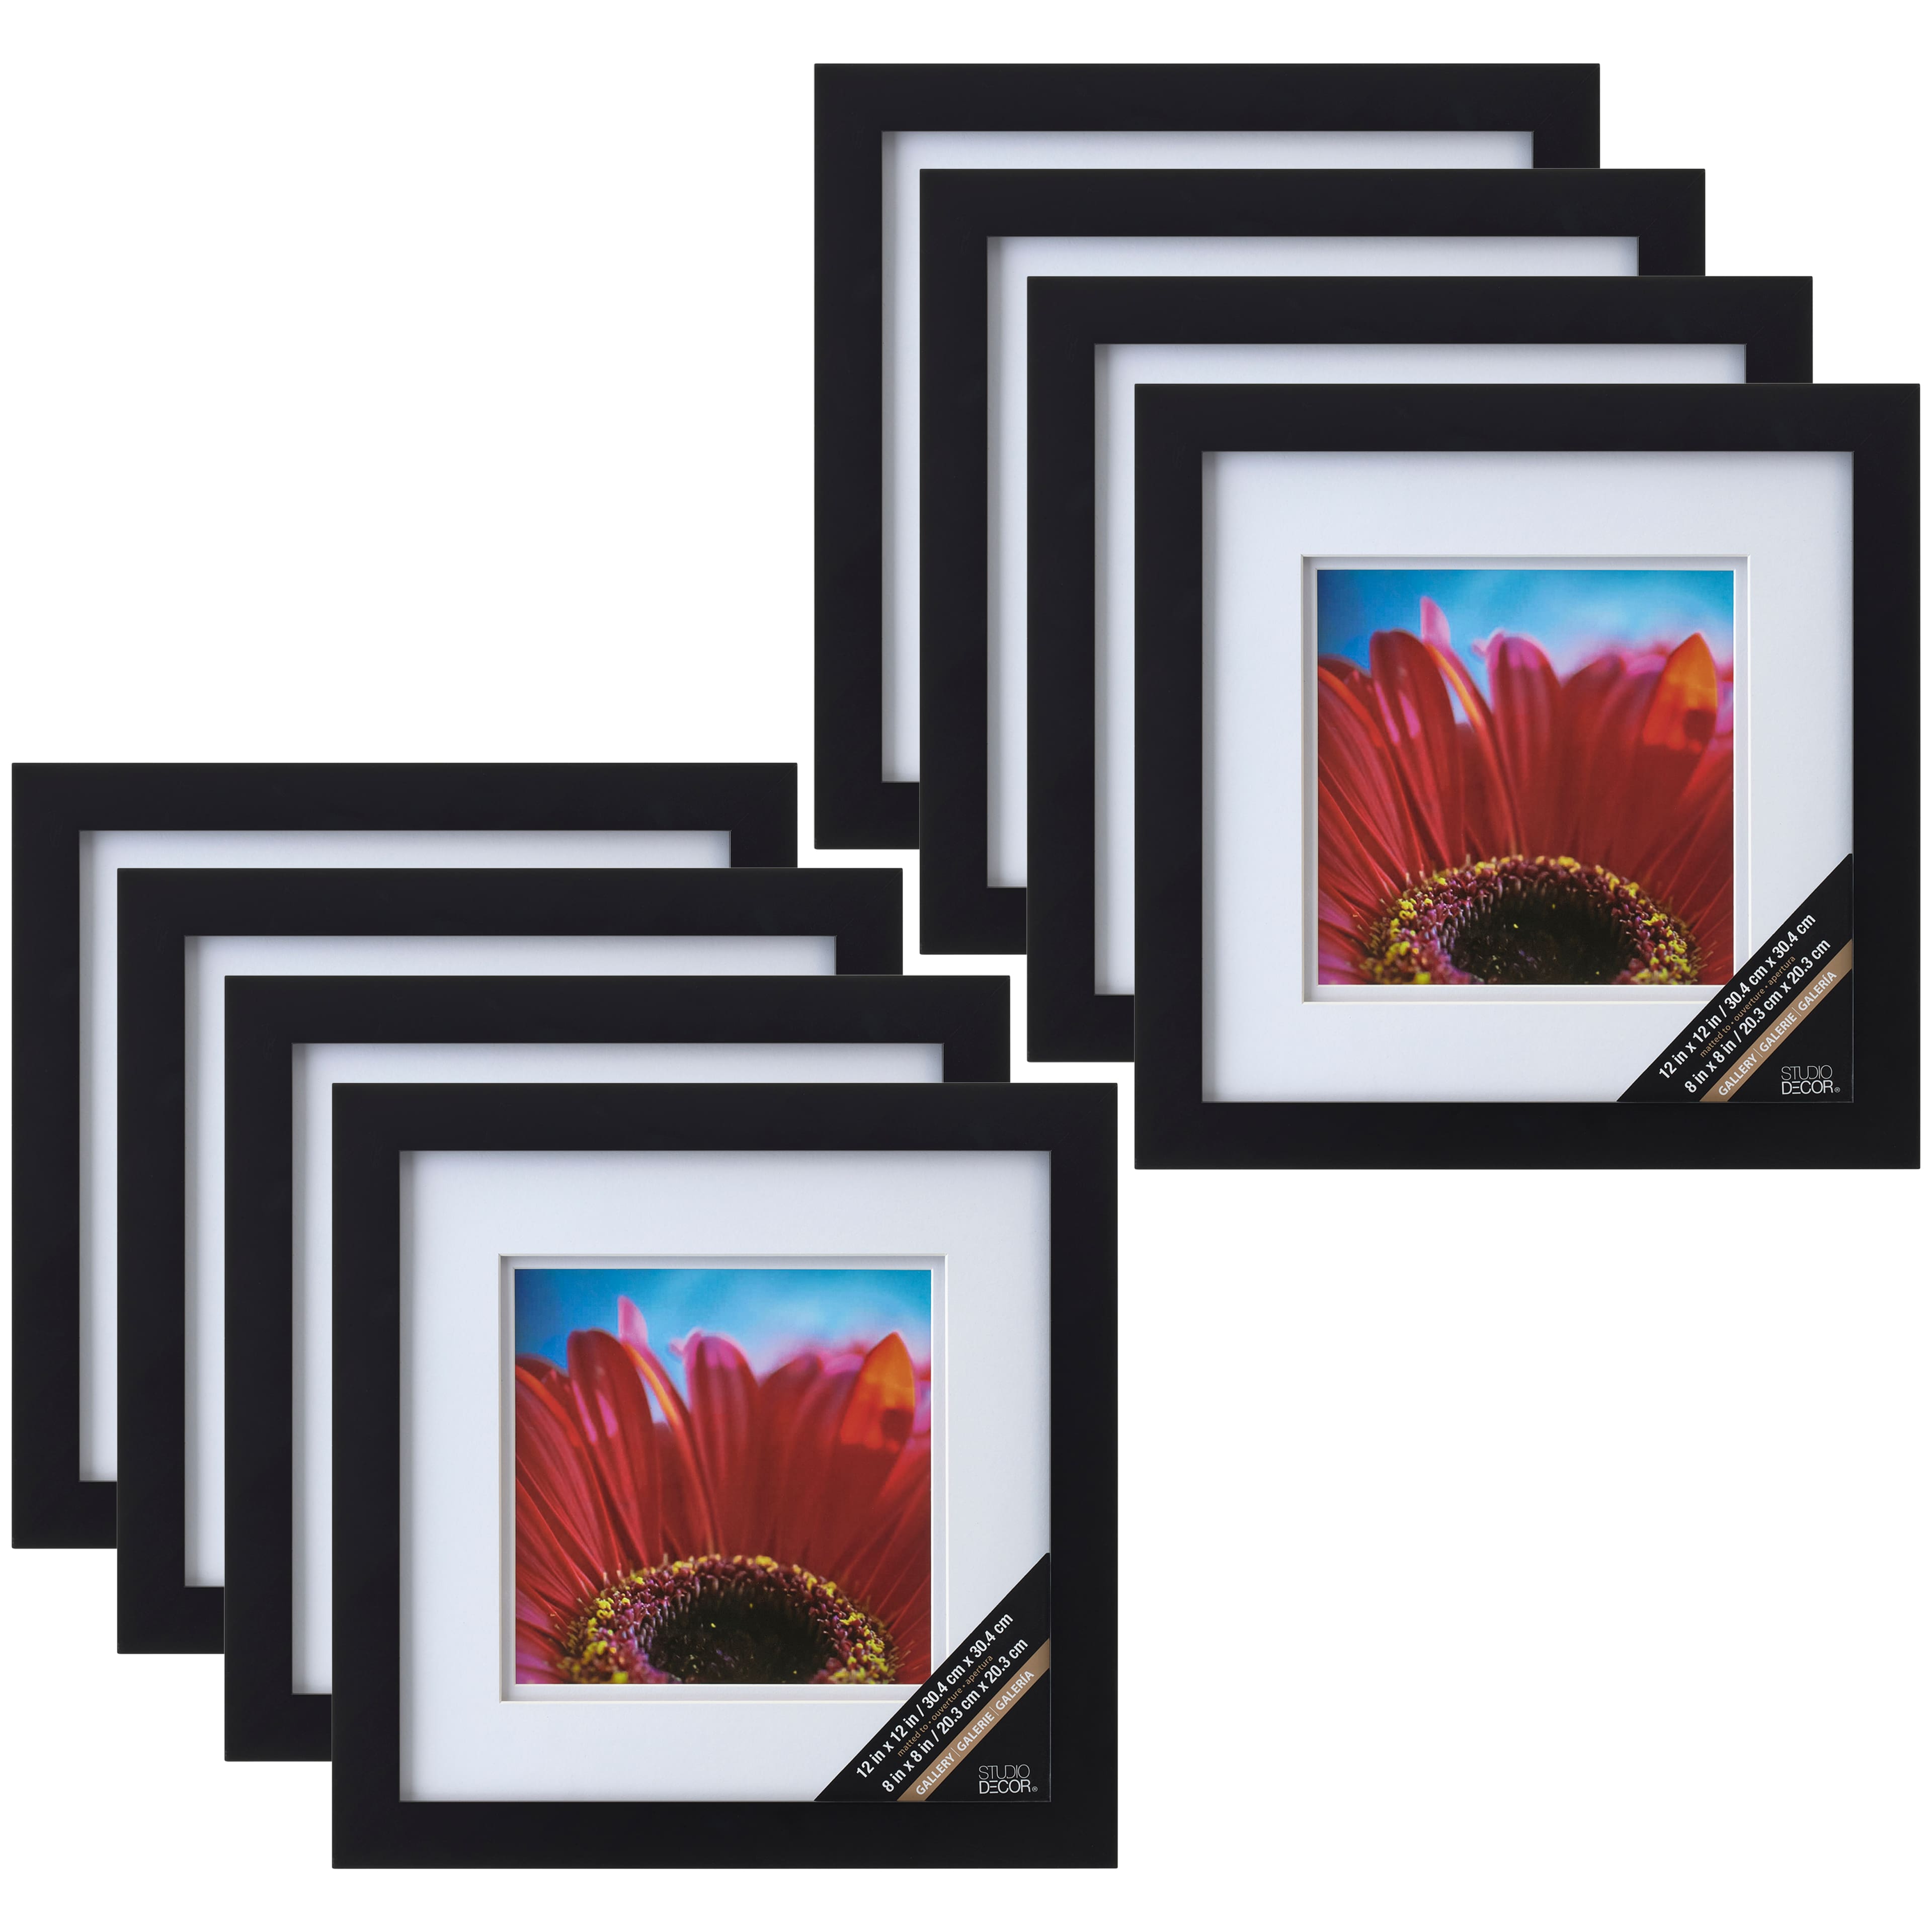 3-Pack White 8 x 8 Shadow Boxes, Fundamentals By Studio Décor®